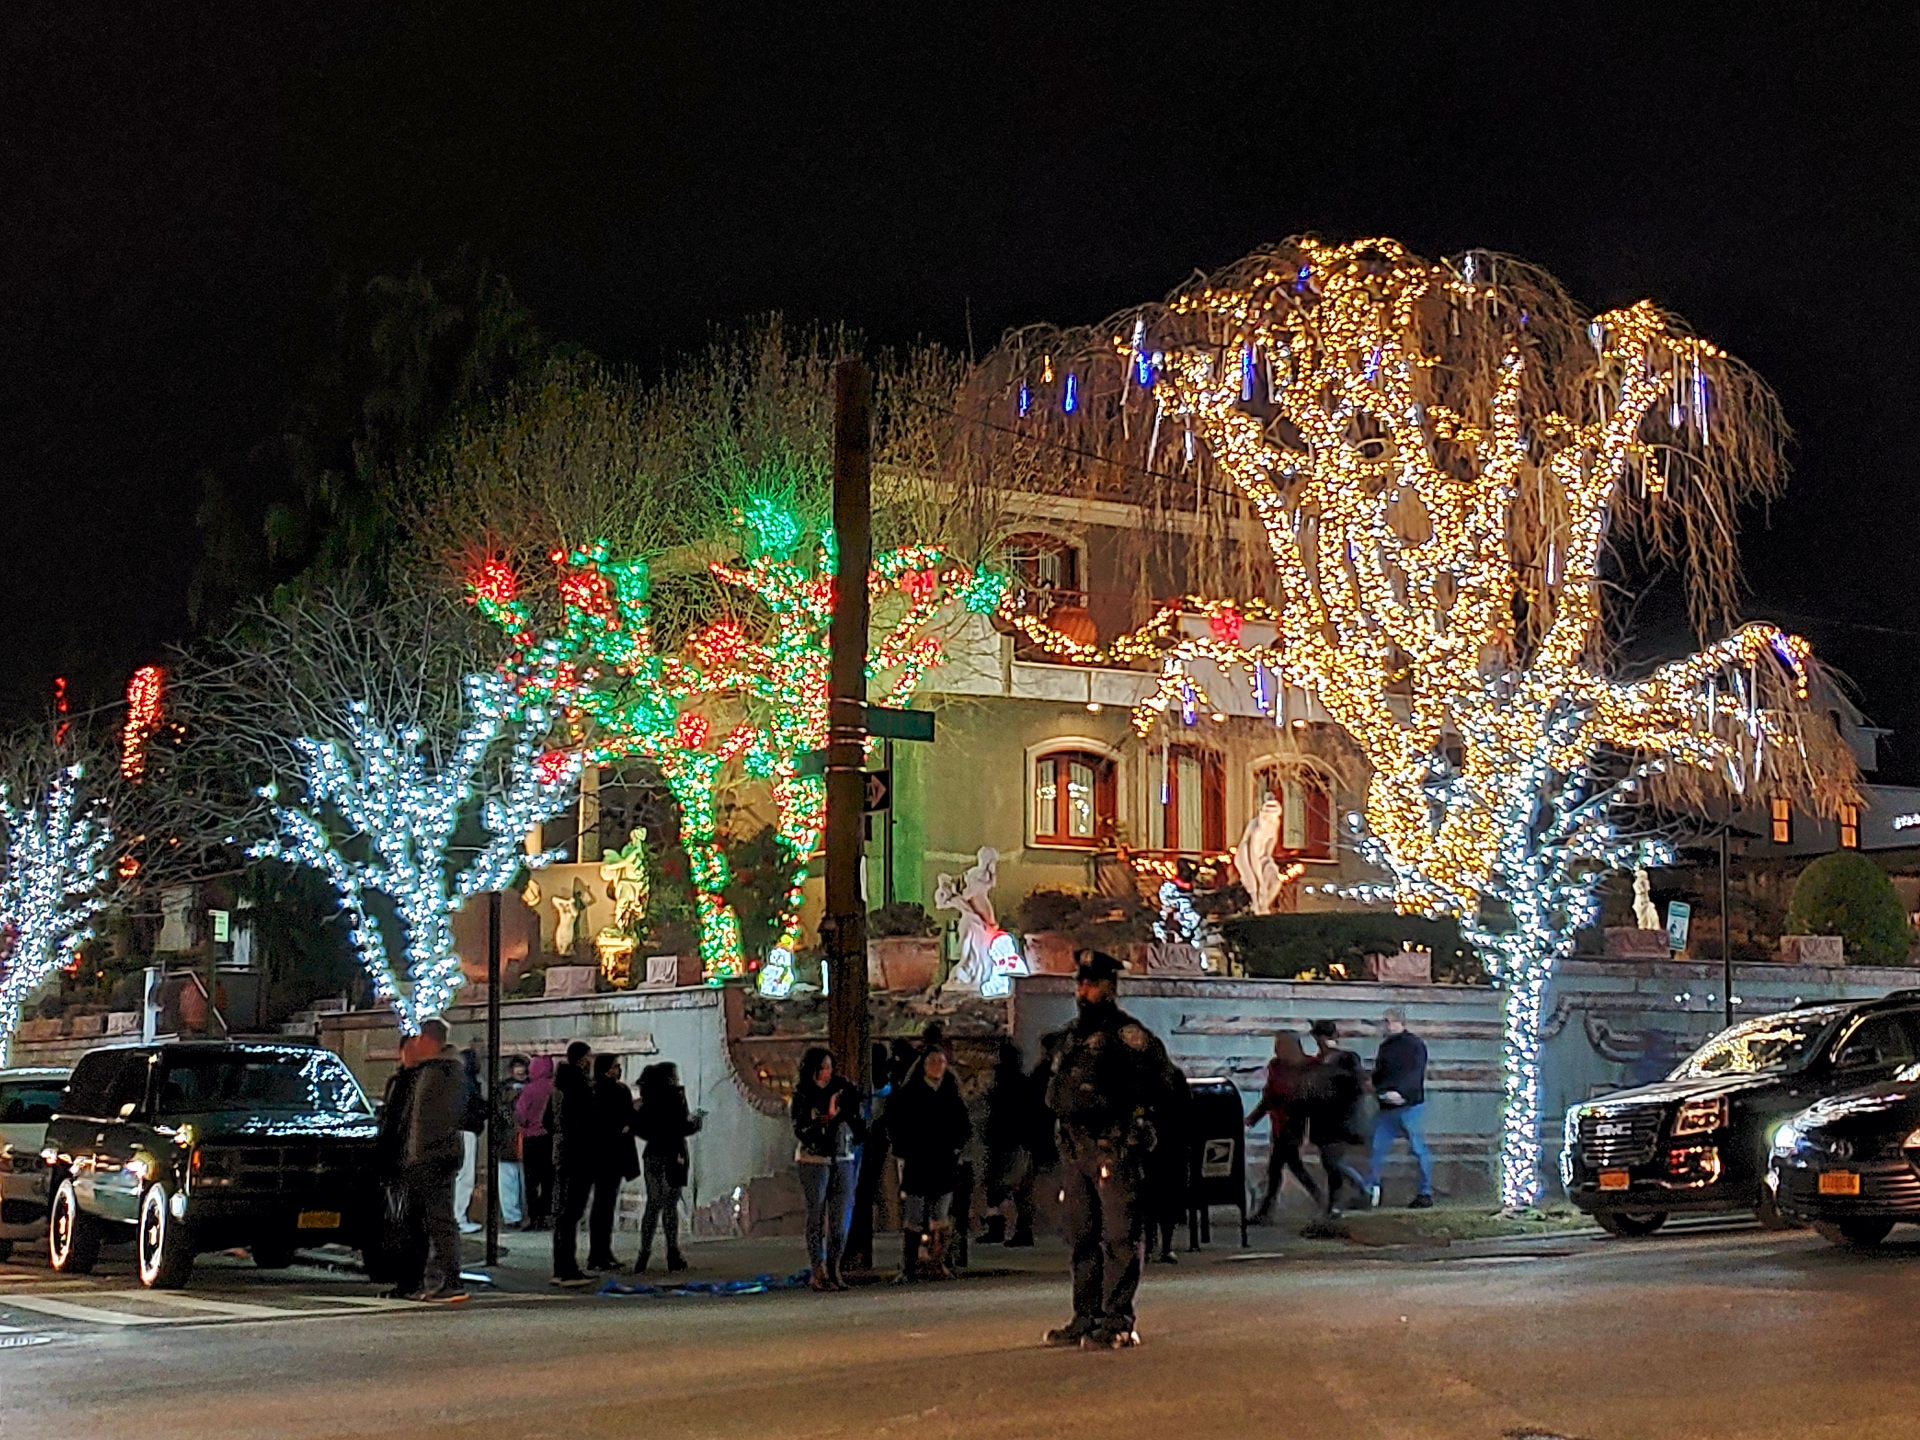 Experience the Christmas wonderland at its best by taking the Dyker Heights Christmas Lights Tour 2019